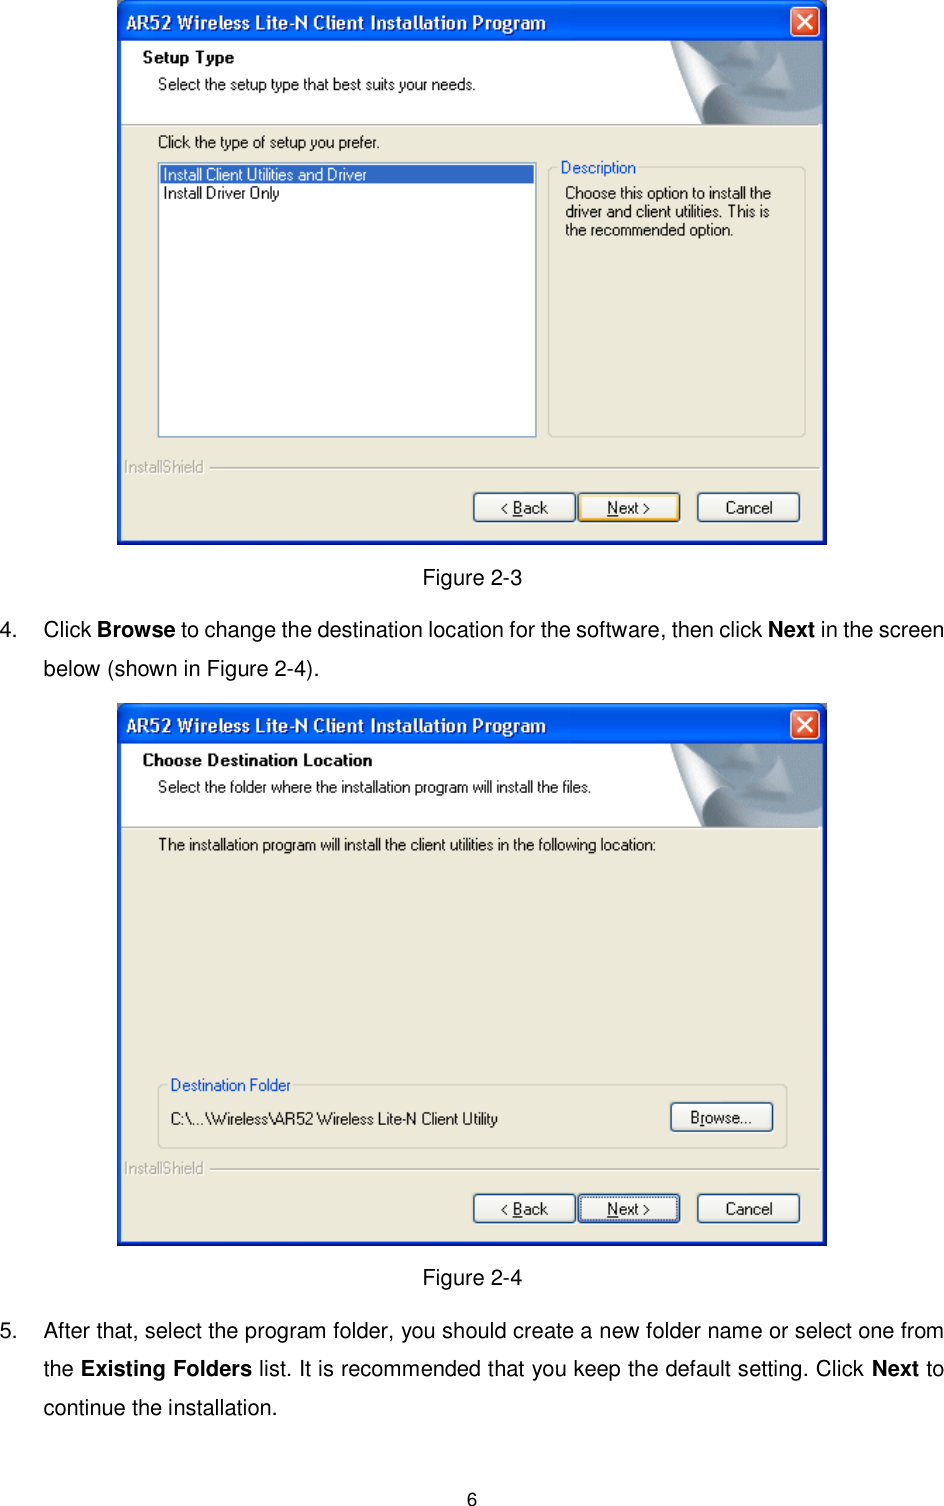  6  Figure 2-3 4.  Click Browse to change the destination location for the software, then click Next in the screen below (shown in XFigure 2-4).  Figure 2-4 5.  After that, select the program folder, you should create a new folder name or select one from the Existing Folders list. It is recommended that you keep the default setting. Click Next to continue the installation. 